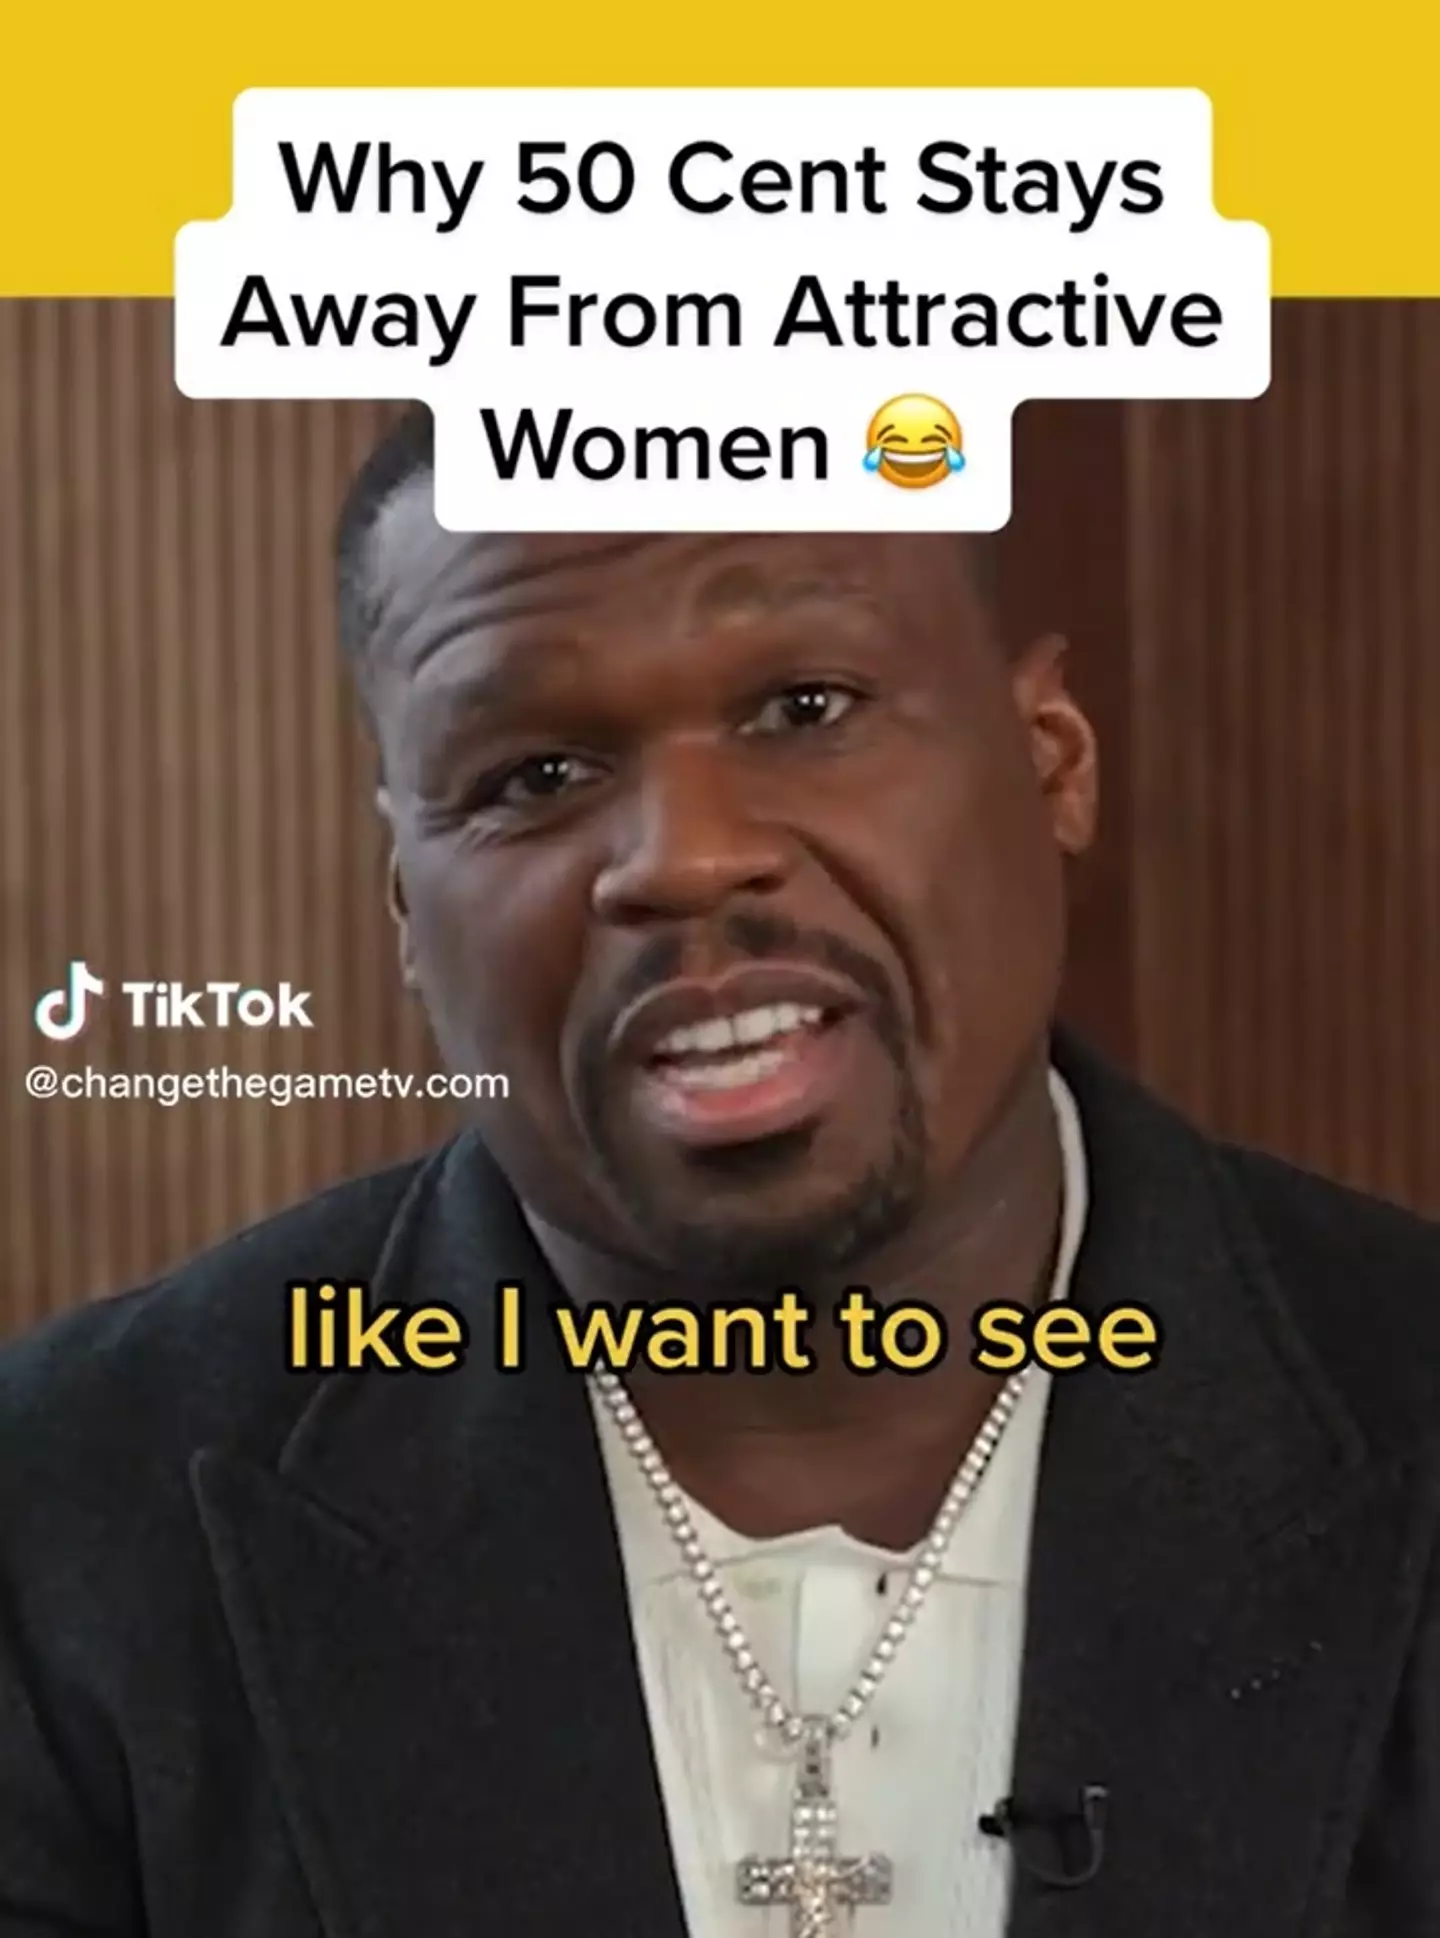 50 Cent made his preferences clear.